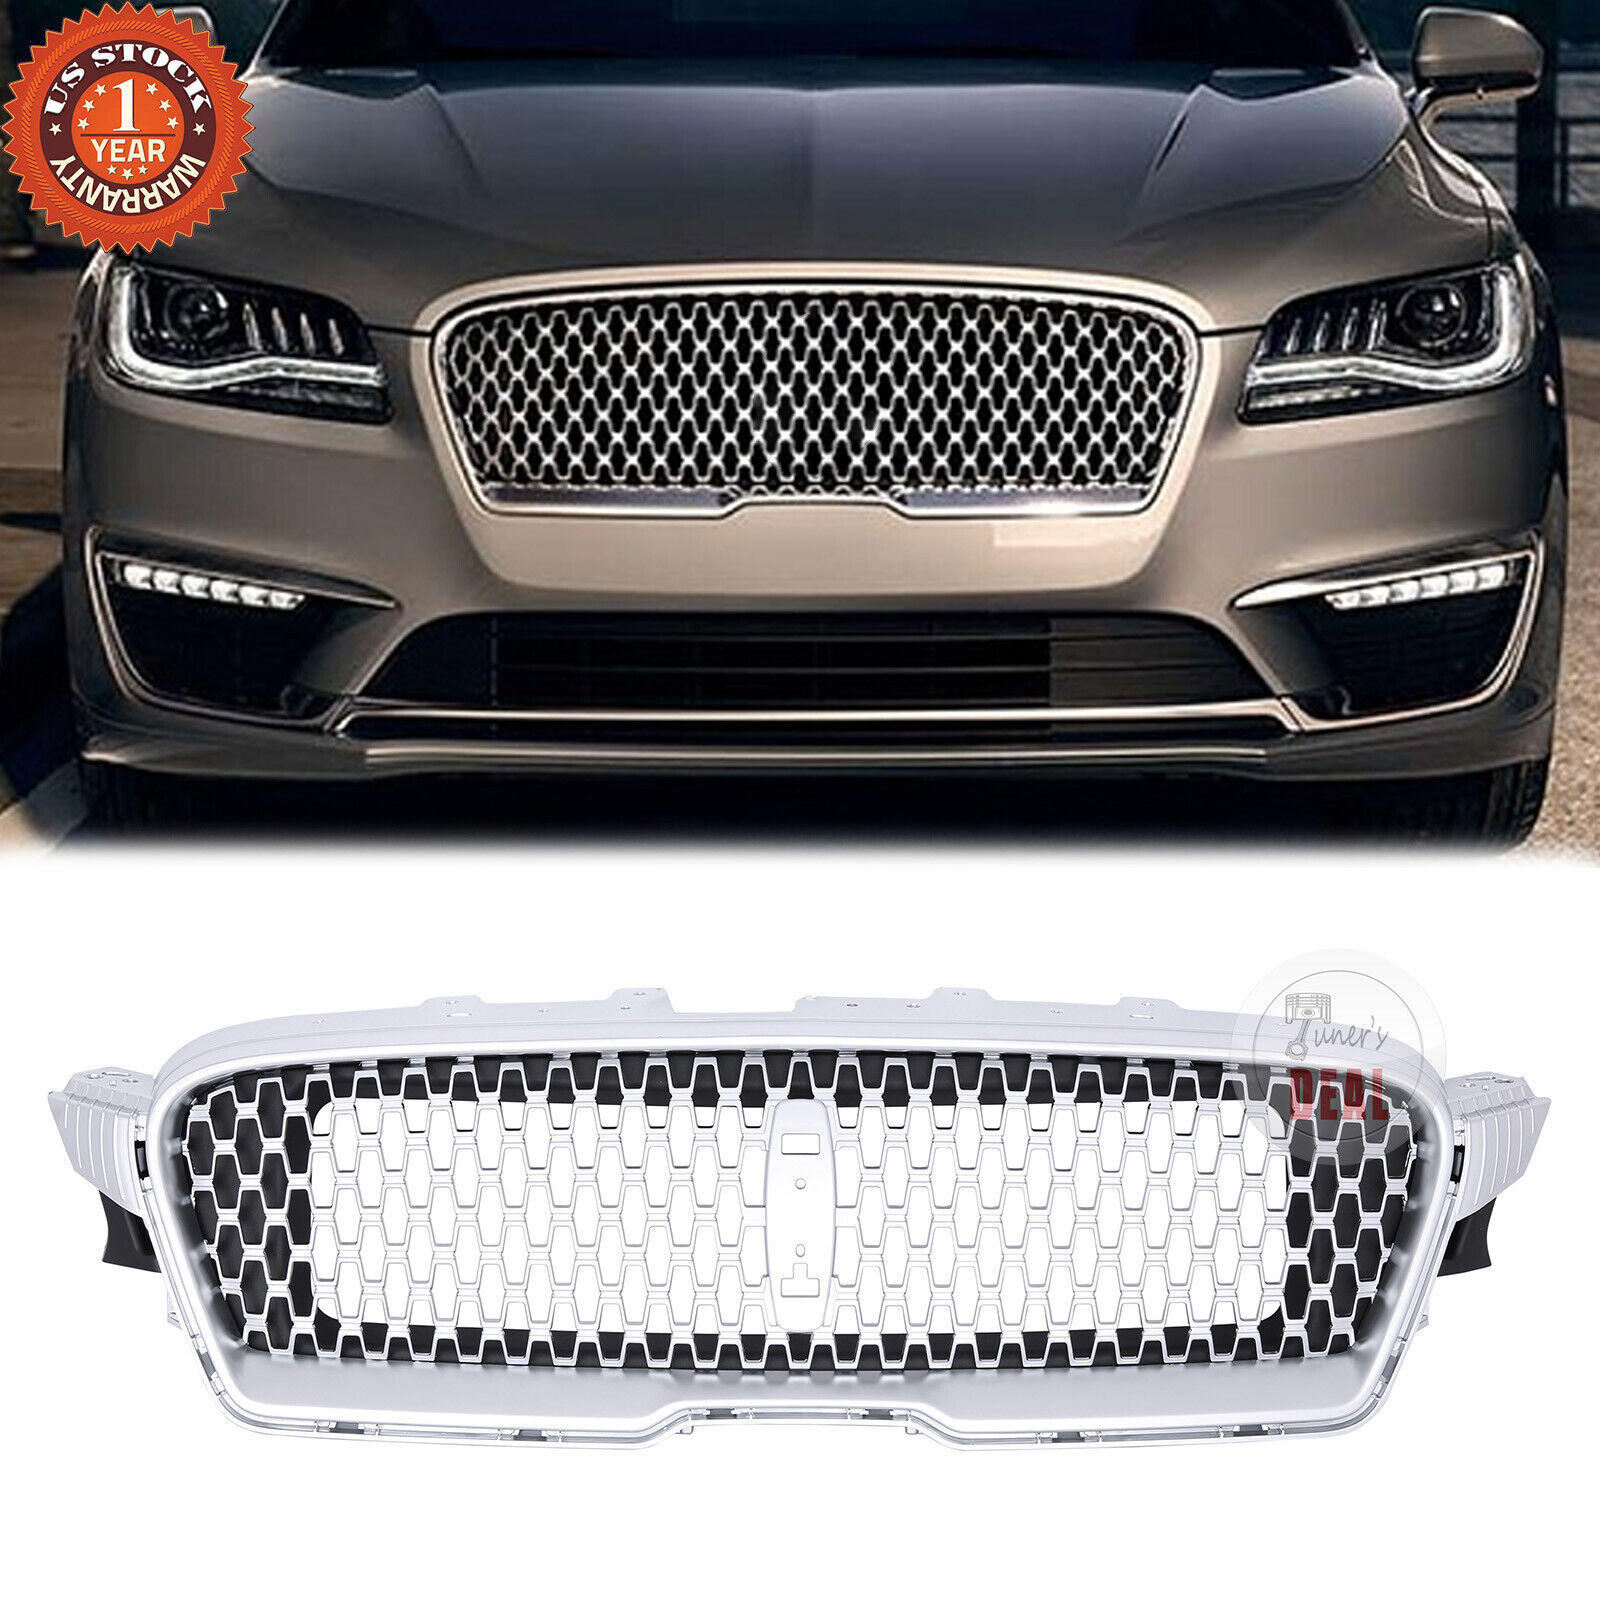 Front Upper Grille Bumper Grille Nickelplated For Lincoln MKZ 2017-2019